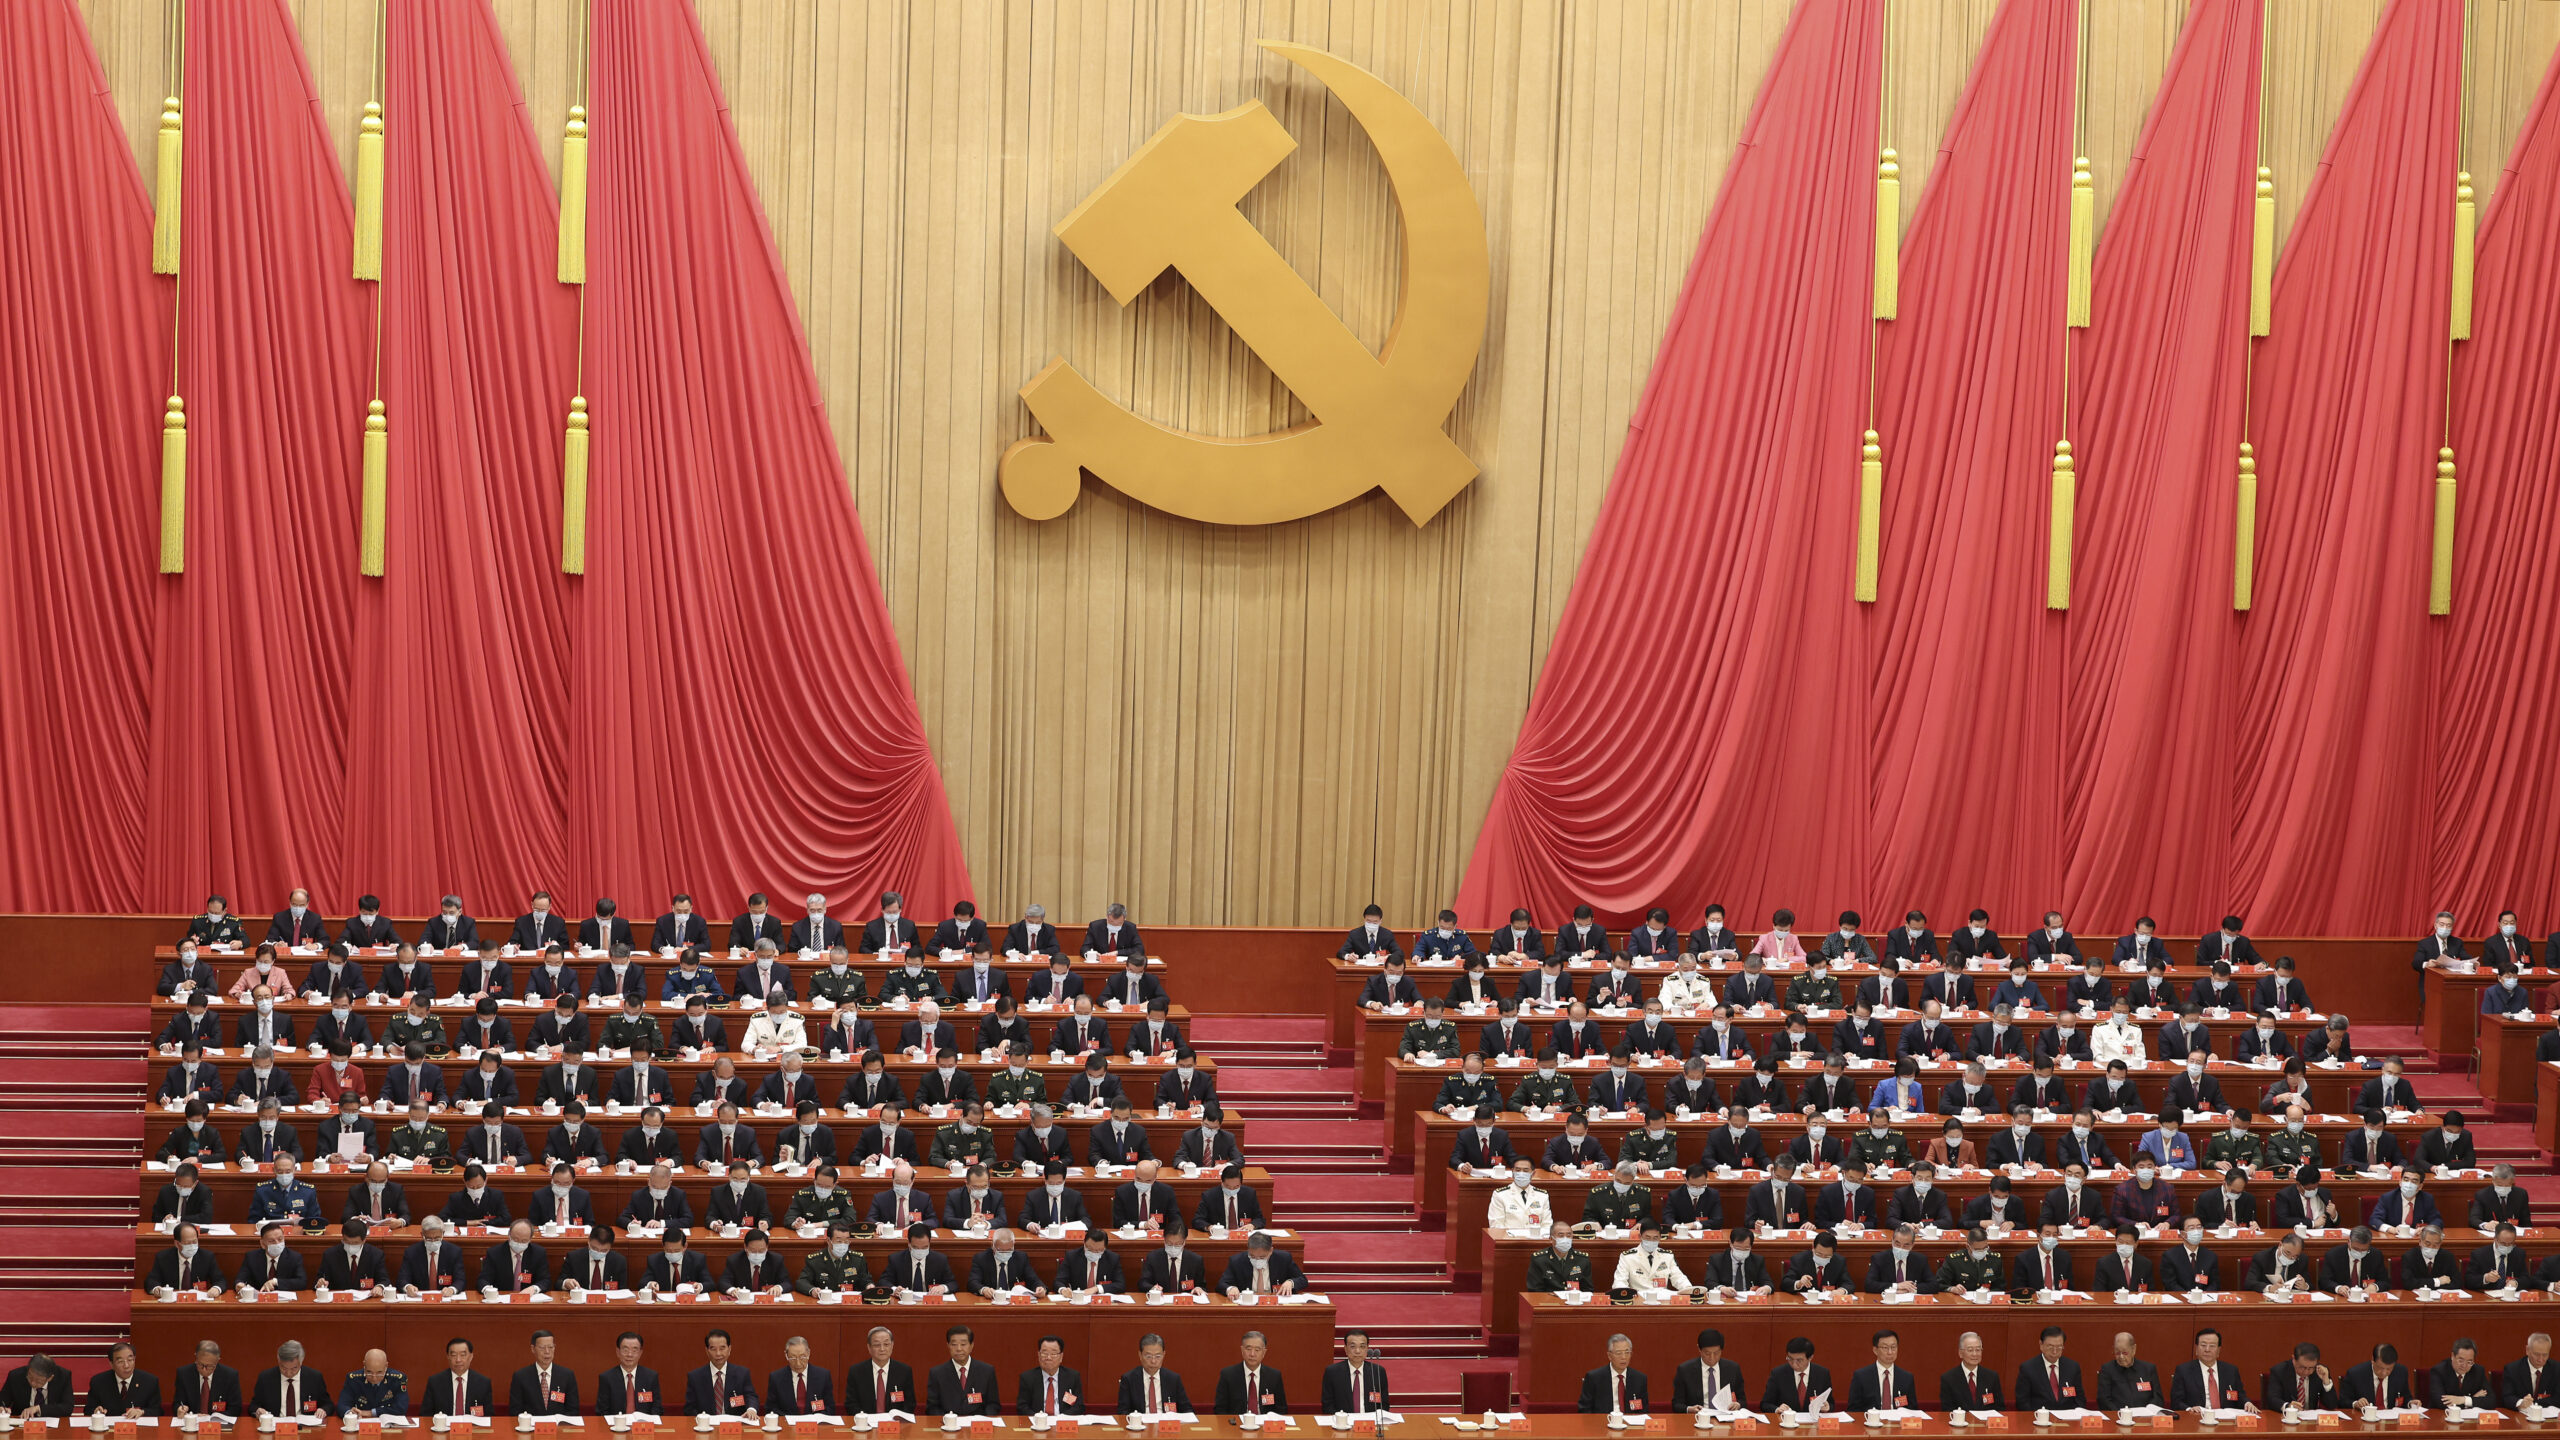 Protests Are Spreading In China As Backlash Grows To The Communist Nation’s Lockdowns: Report